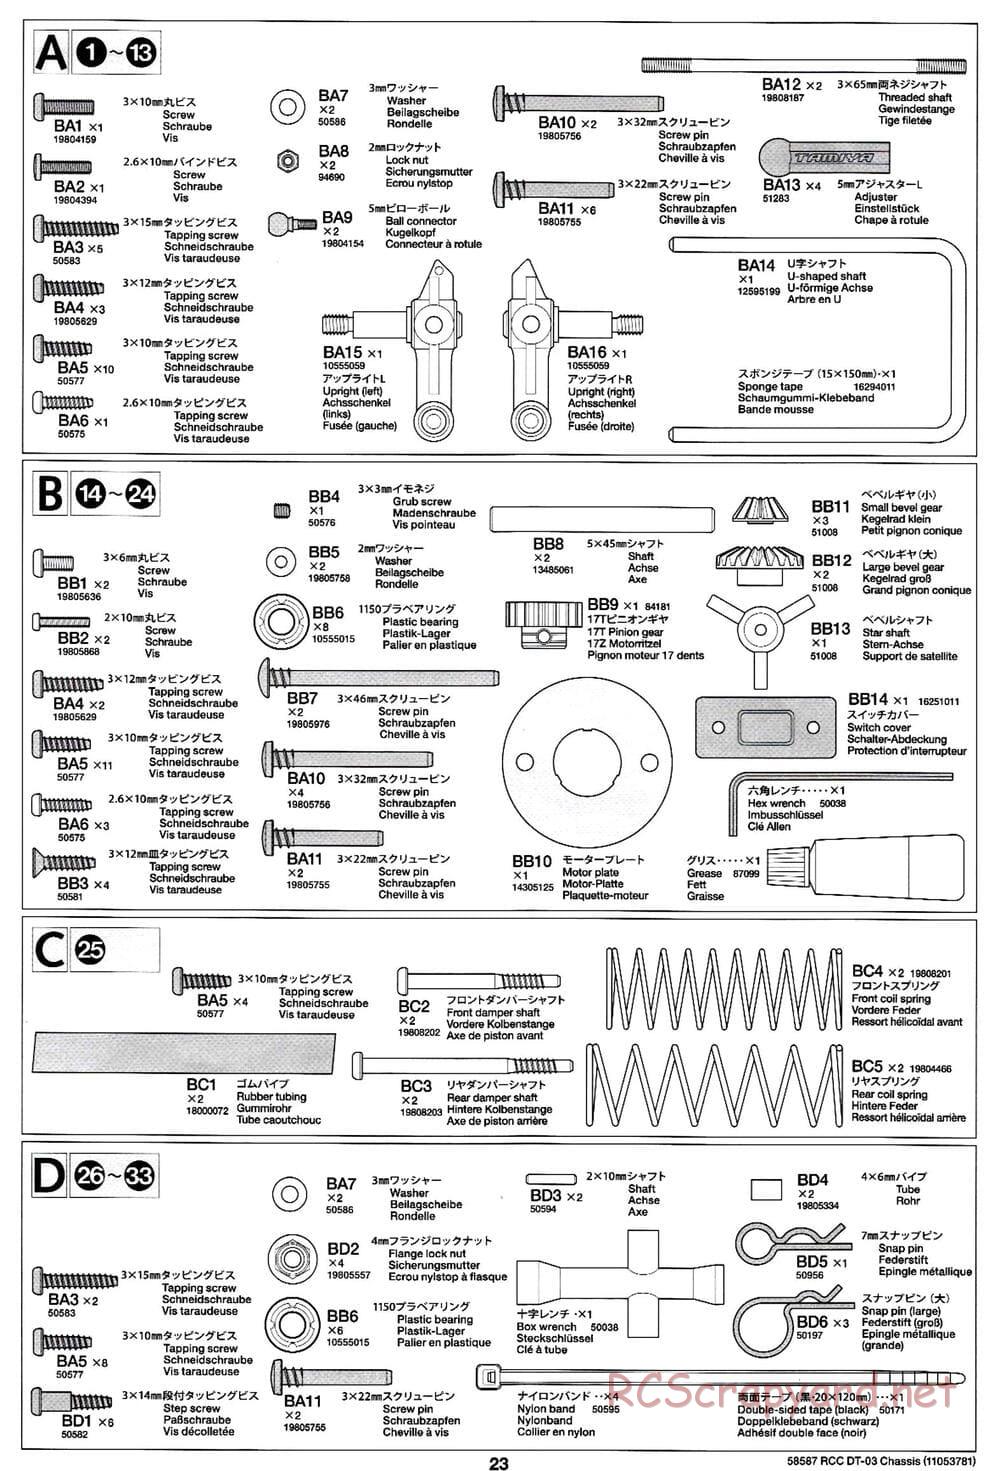 Tamiya - Neo Fighter Buggy Chassis - Manual - Page 23